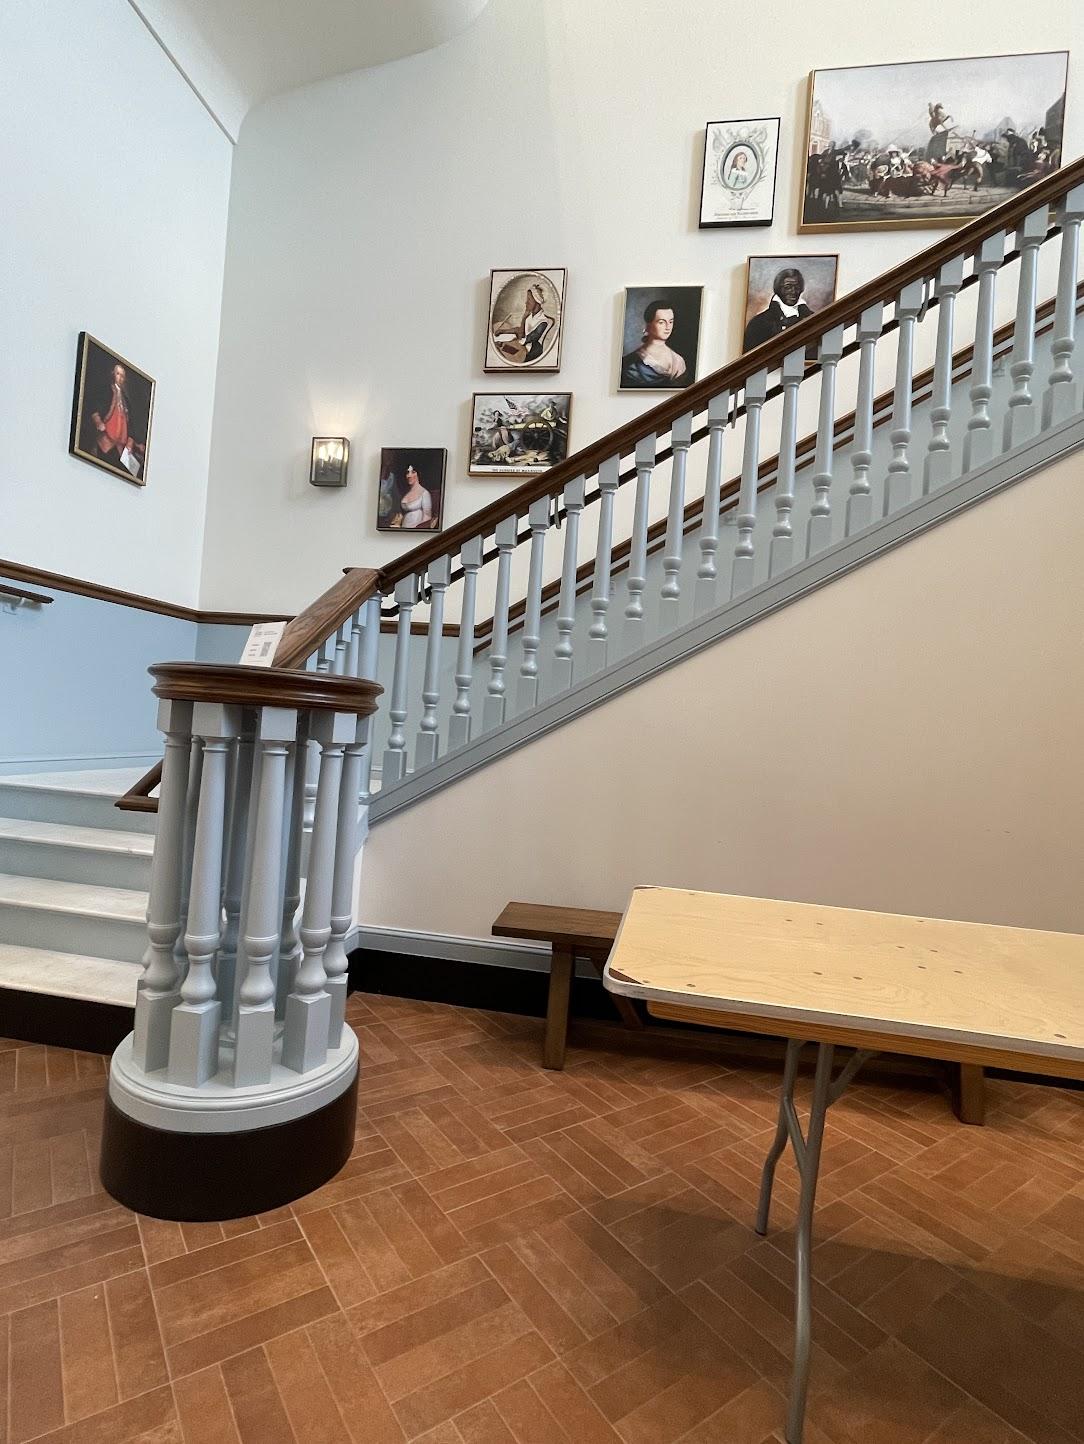 A staircase with a table and a bench

Description automatically generated